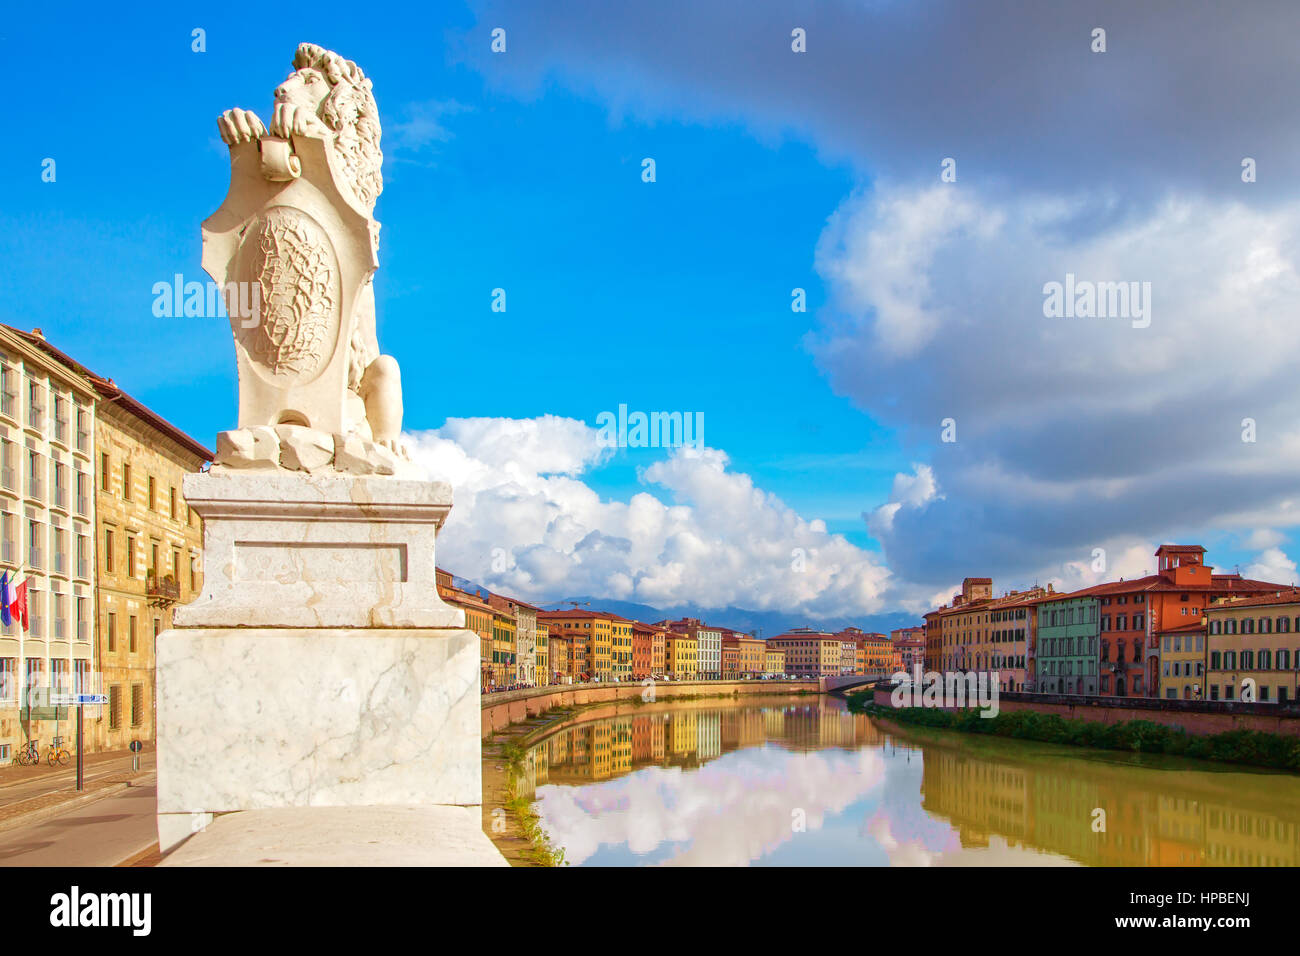 Pisa, Arno river, lion statue and building facades reflection. Lungarno view. Tuscany, Italy, Europe. Stock Photo